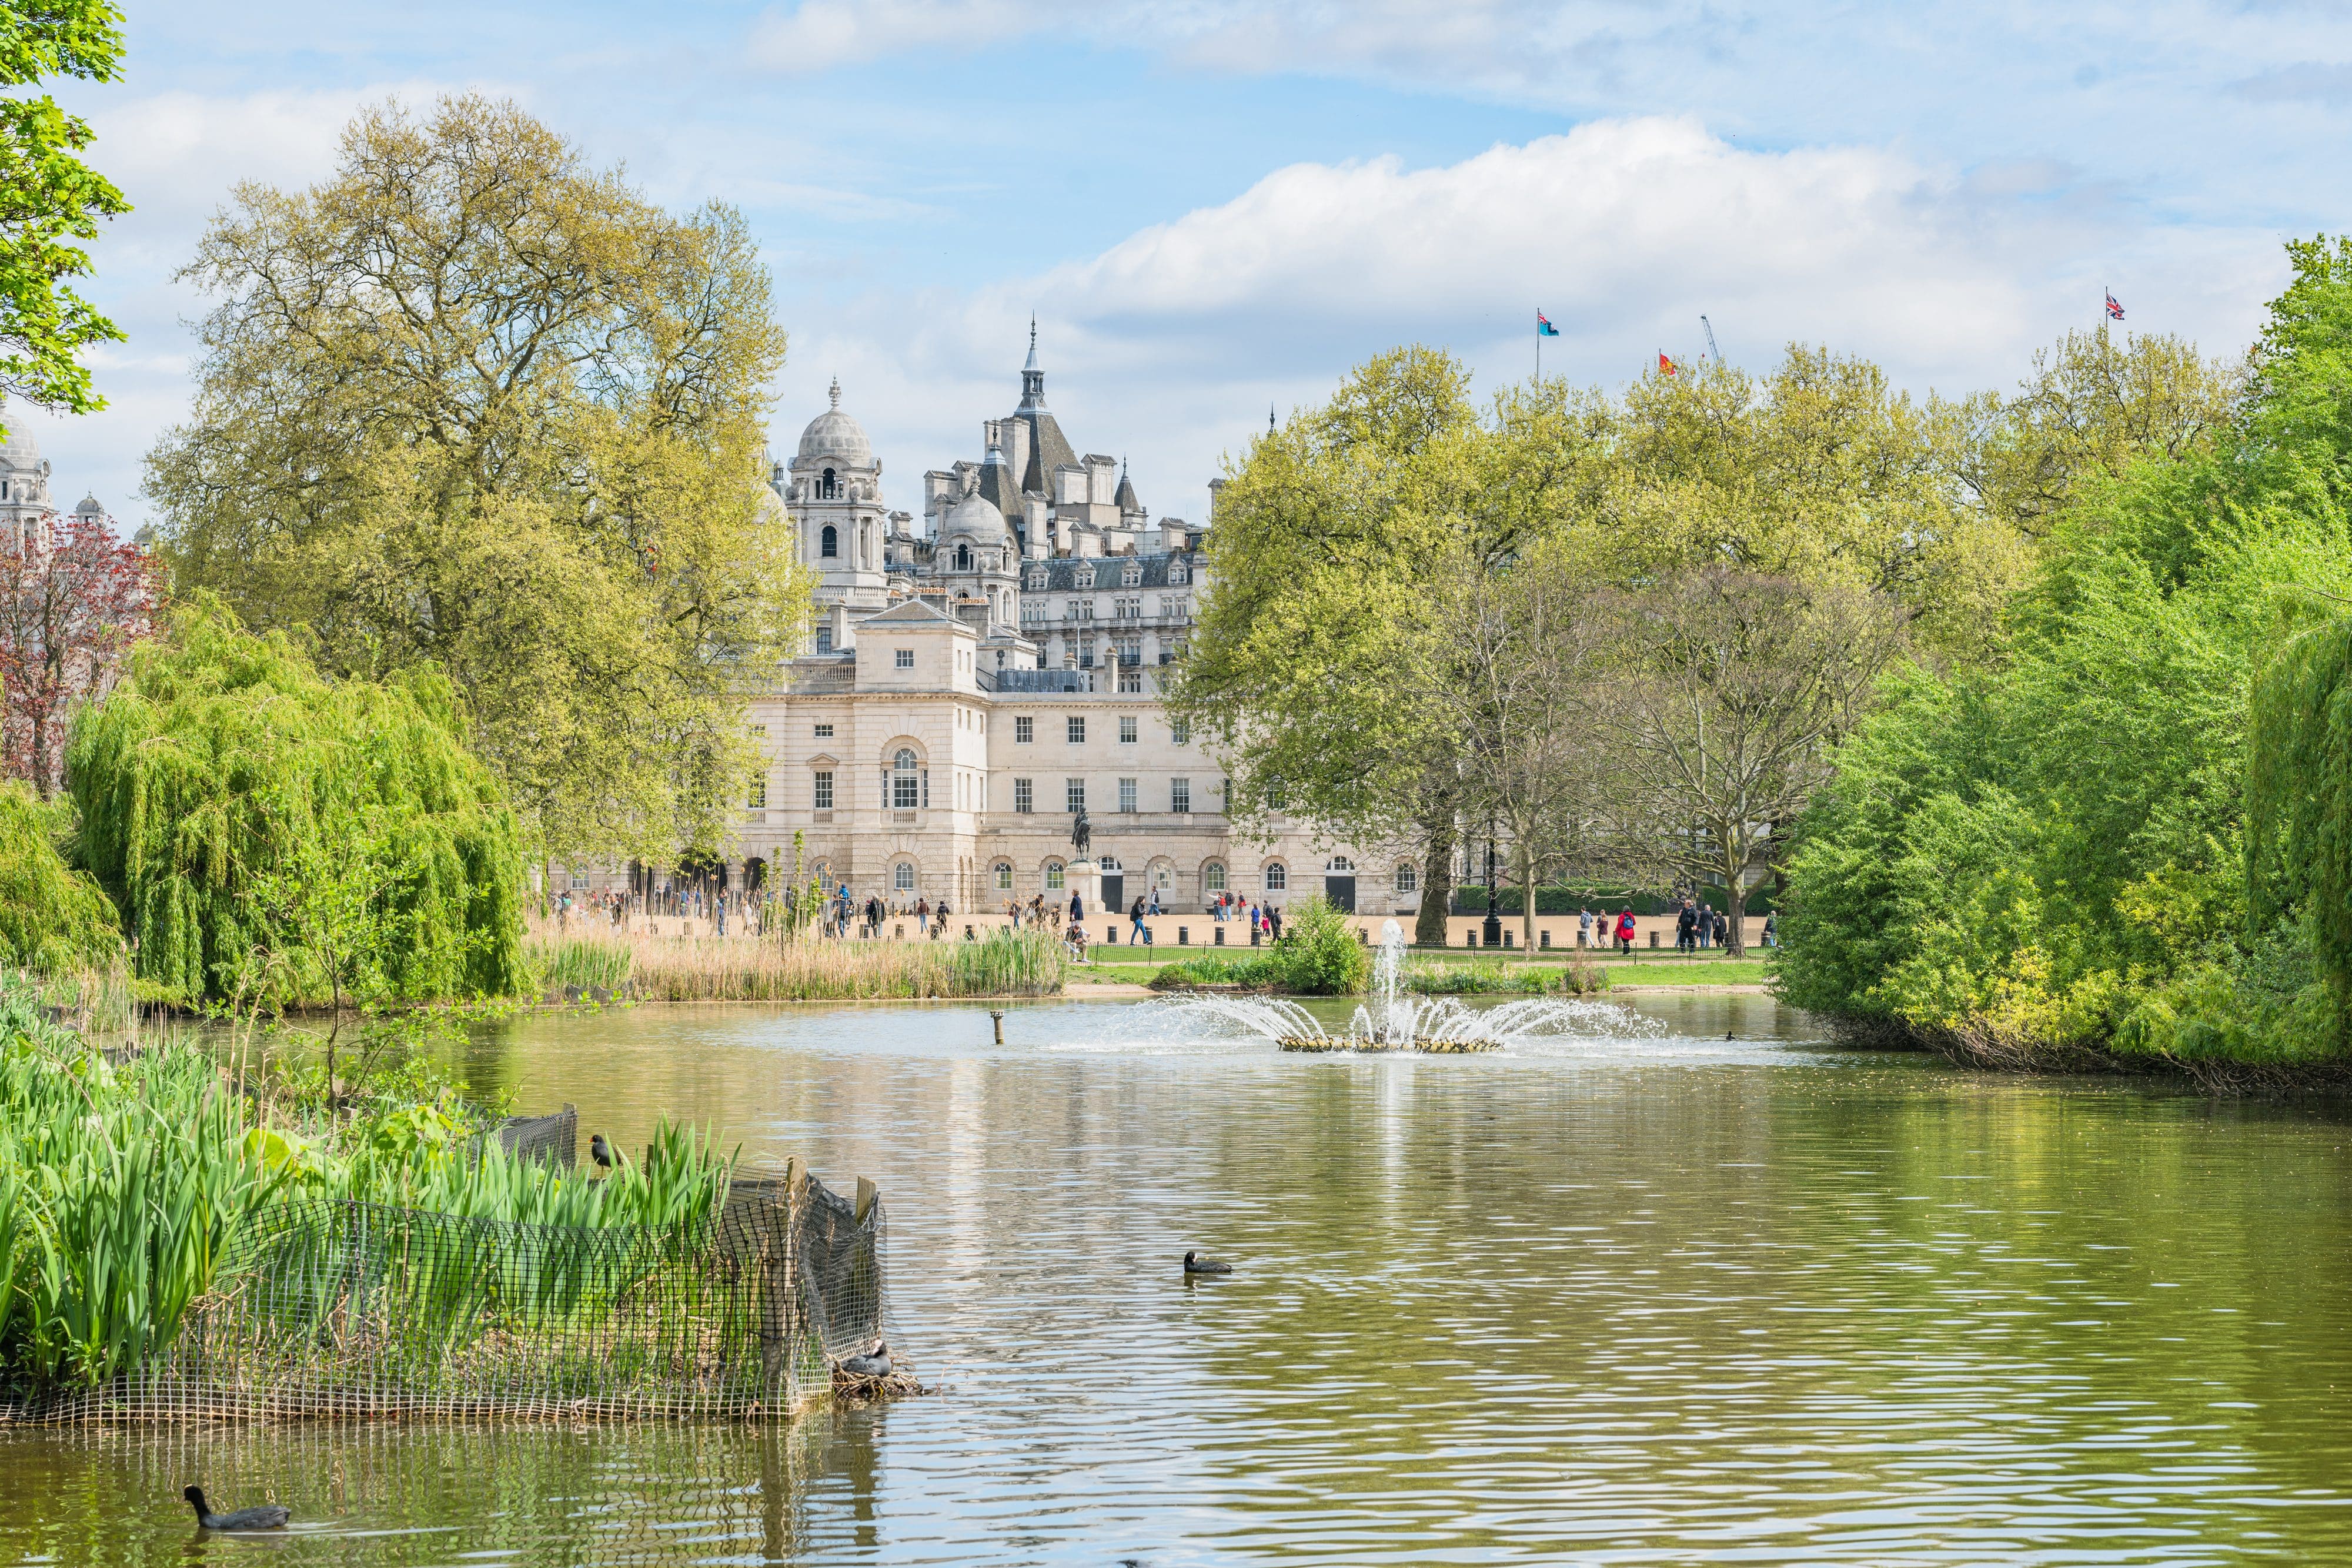 View of Horse Guards Parade from the lake in St James's Park, London